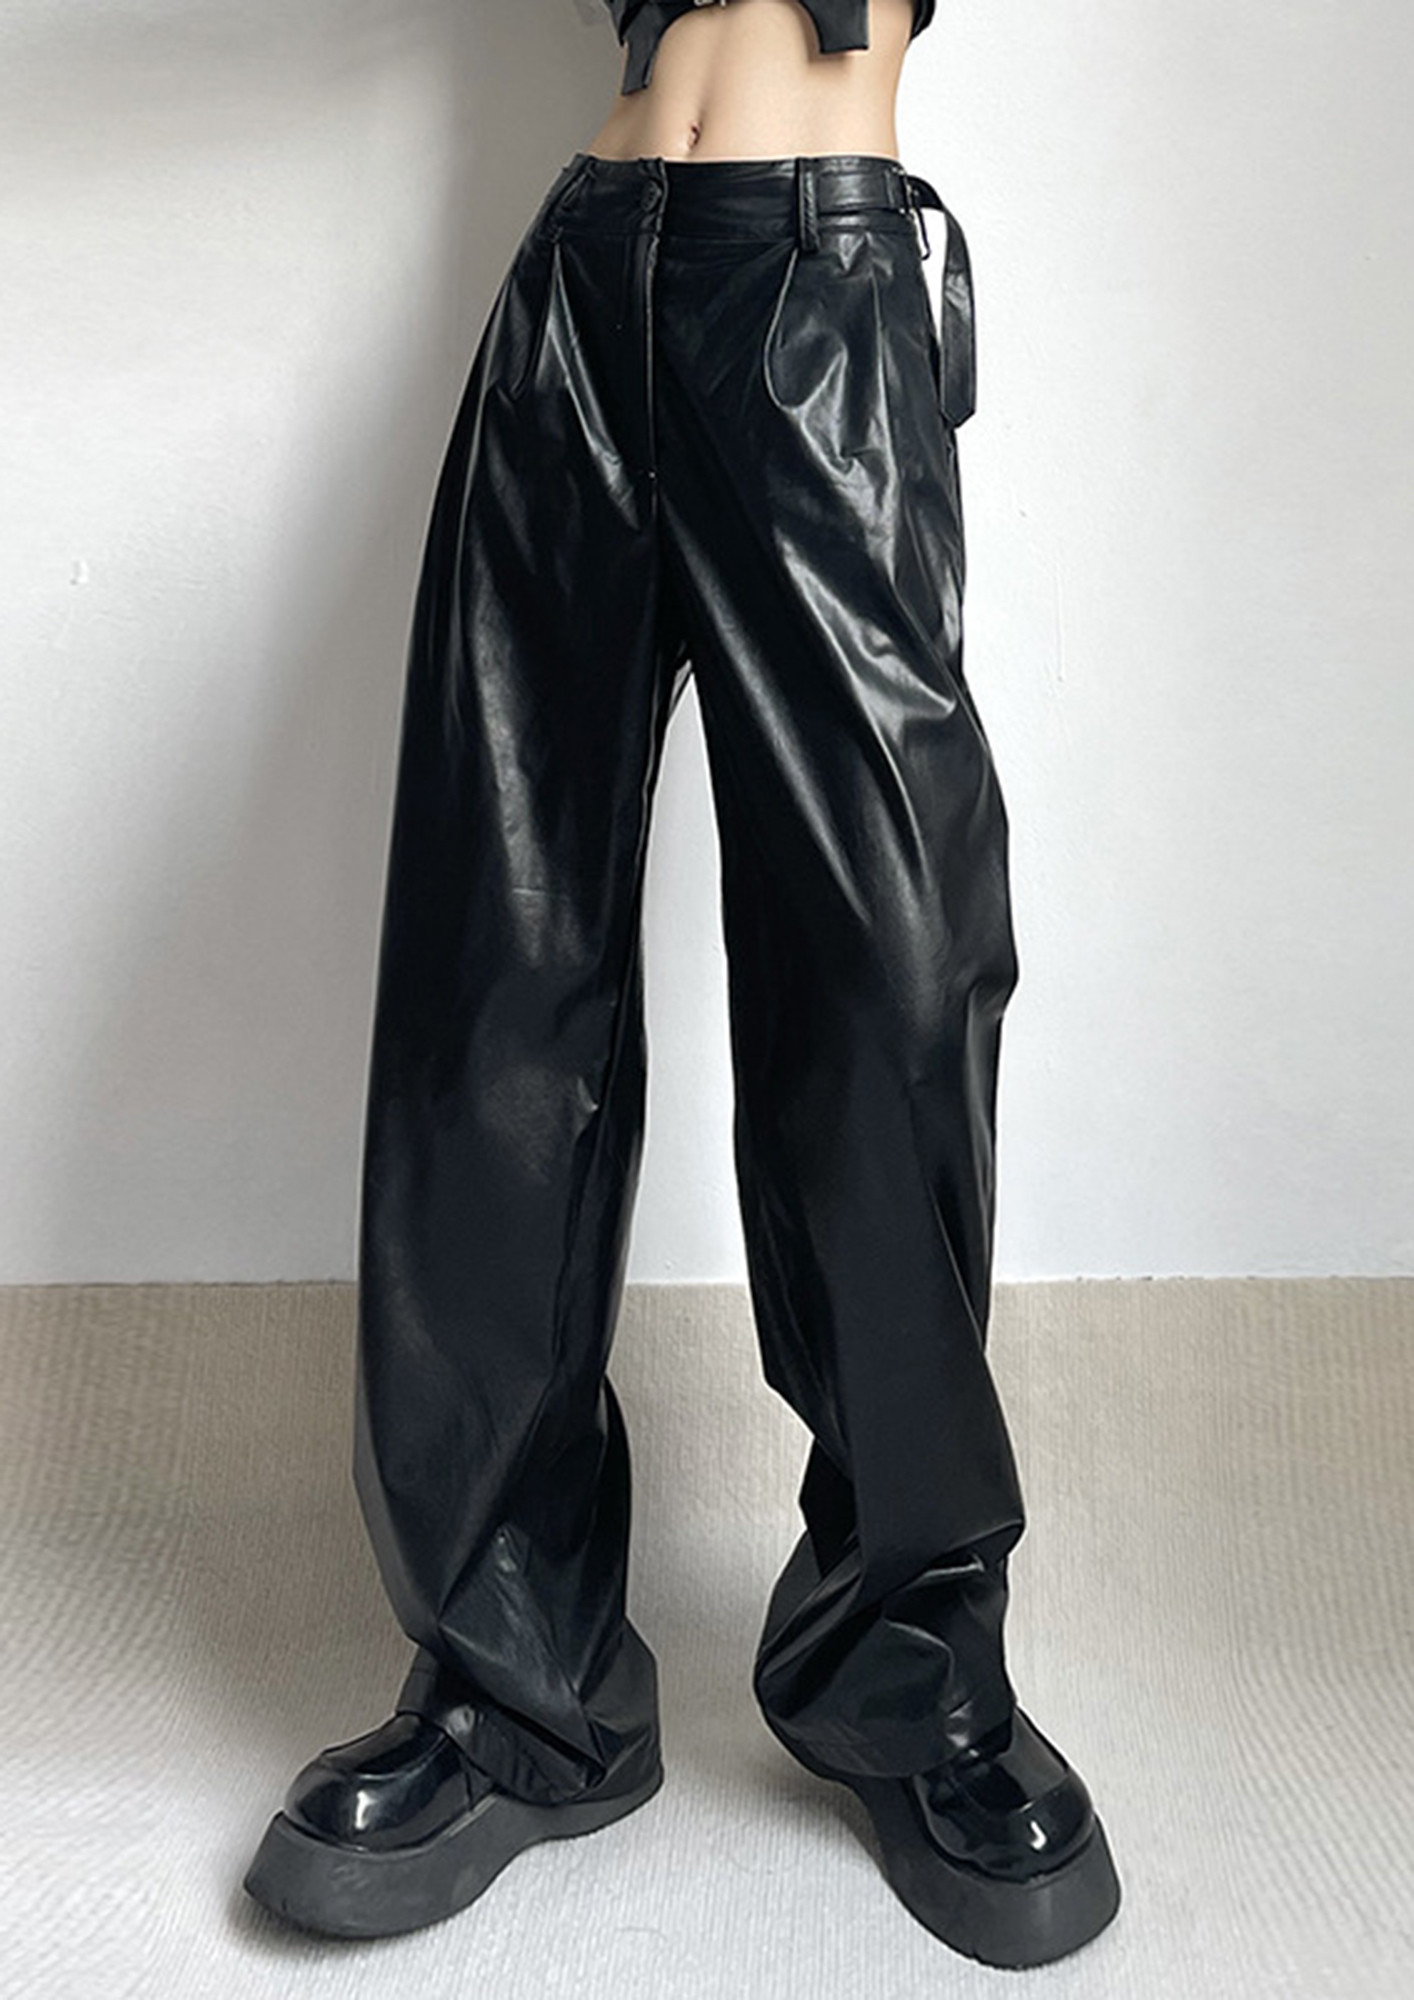 NEXT ONE Relaxed Women Black Trousers - Buy NEXT ONE Relaxed Women Black  Trousers Online at Best Prices in India